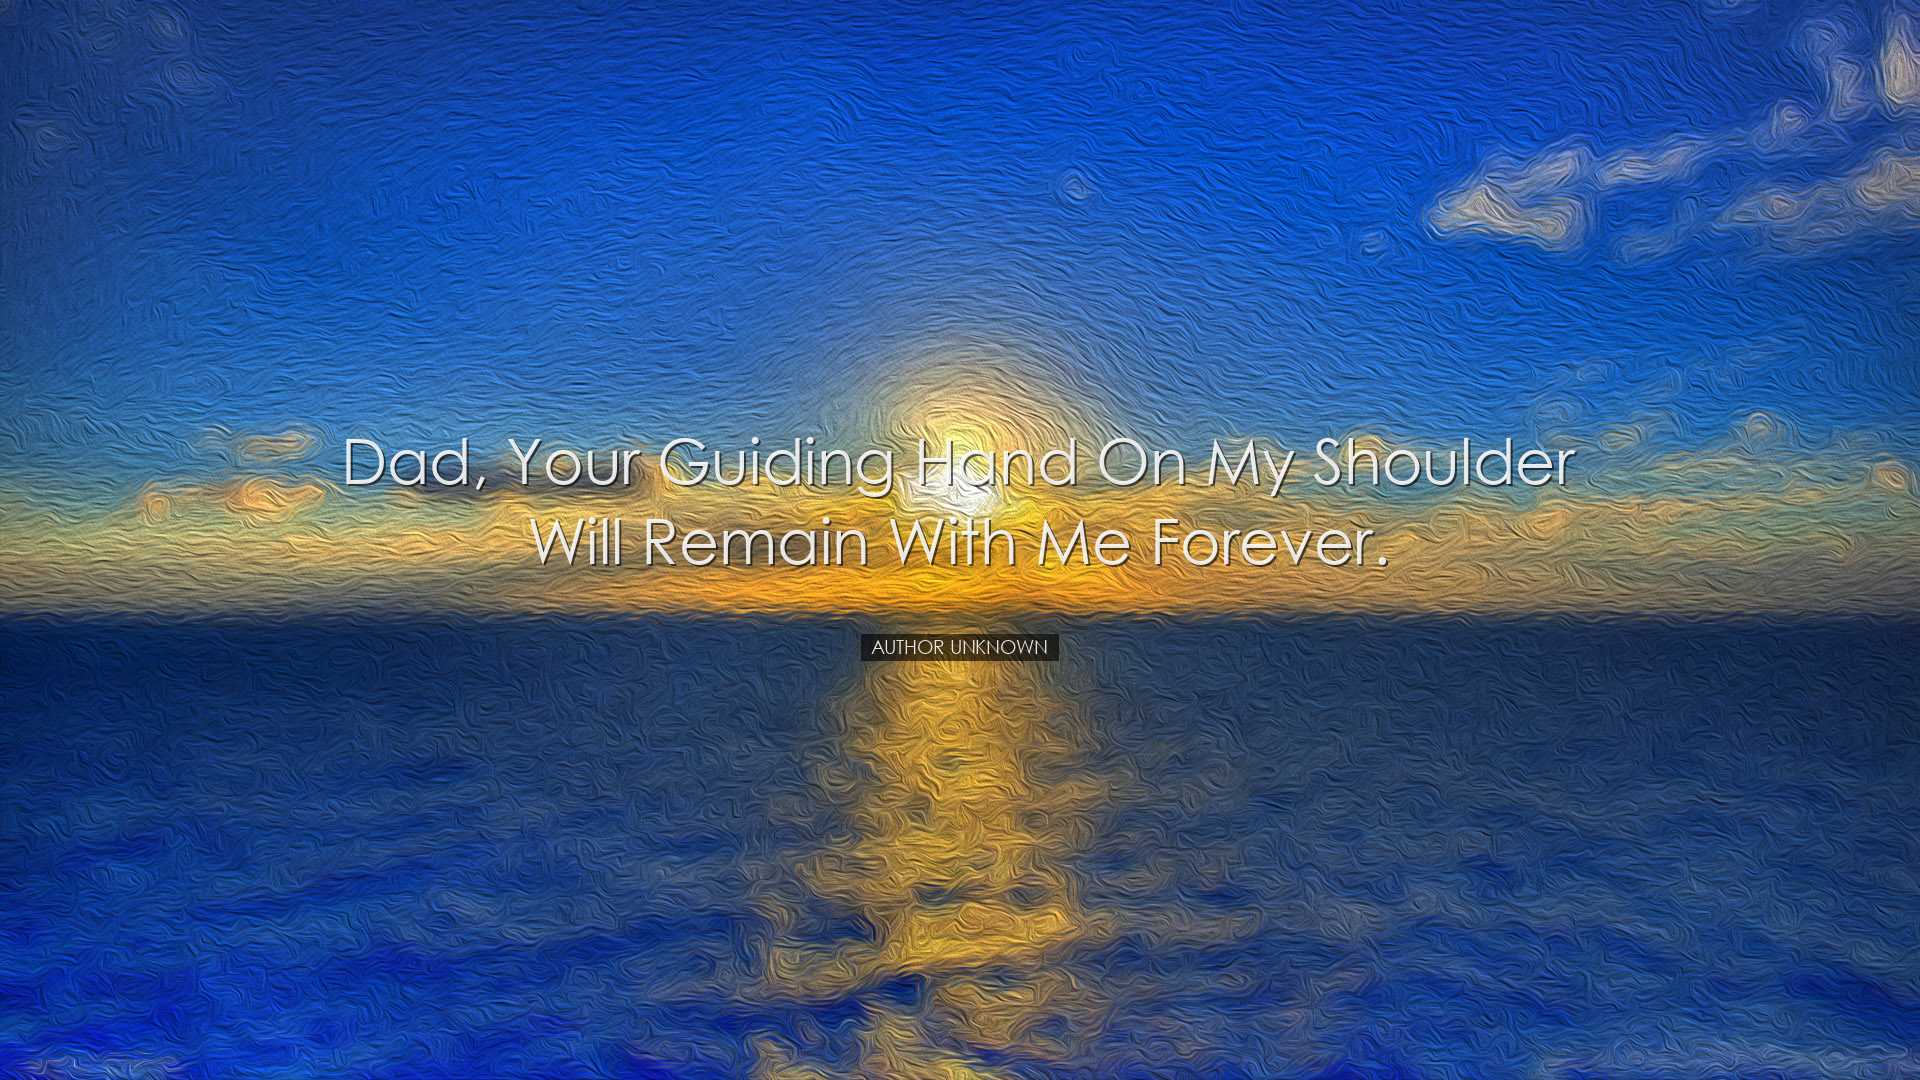 Dad, your guiding hand on my shoulder will remain with me forever.